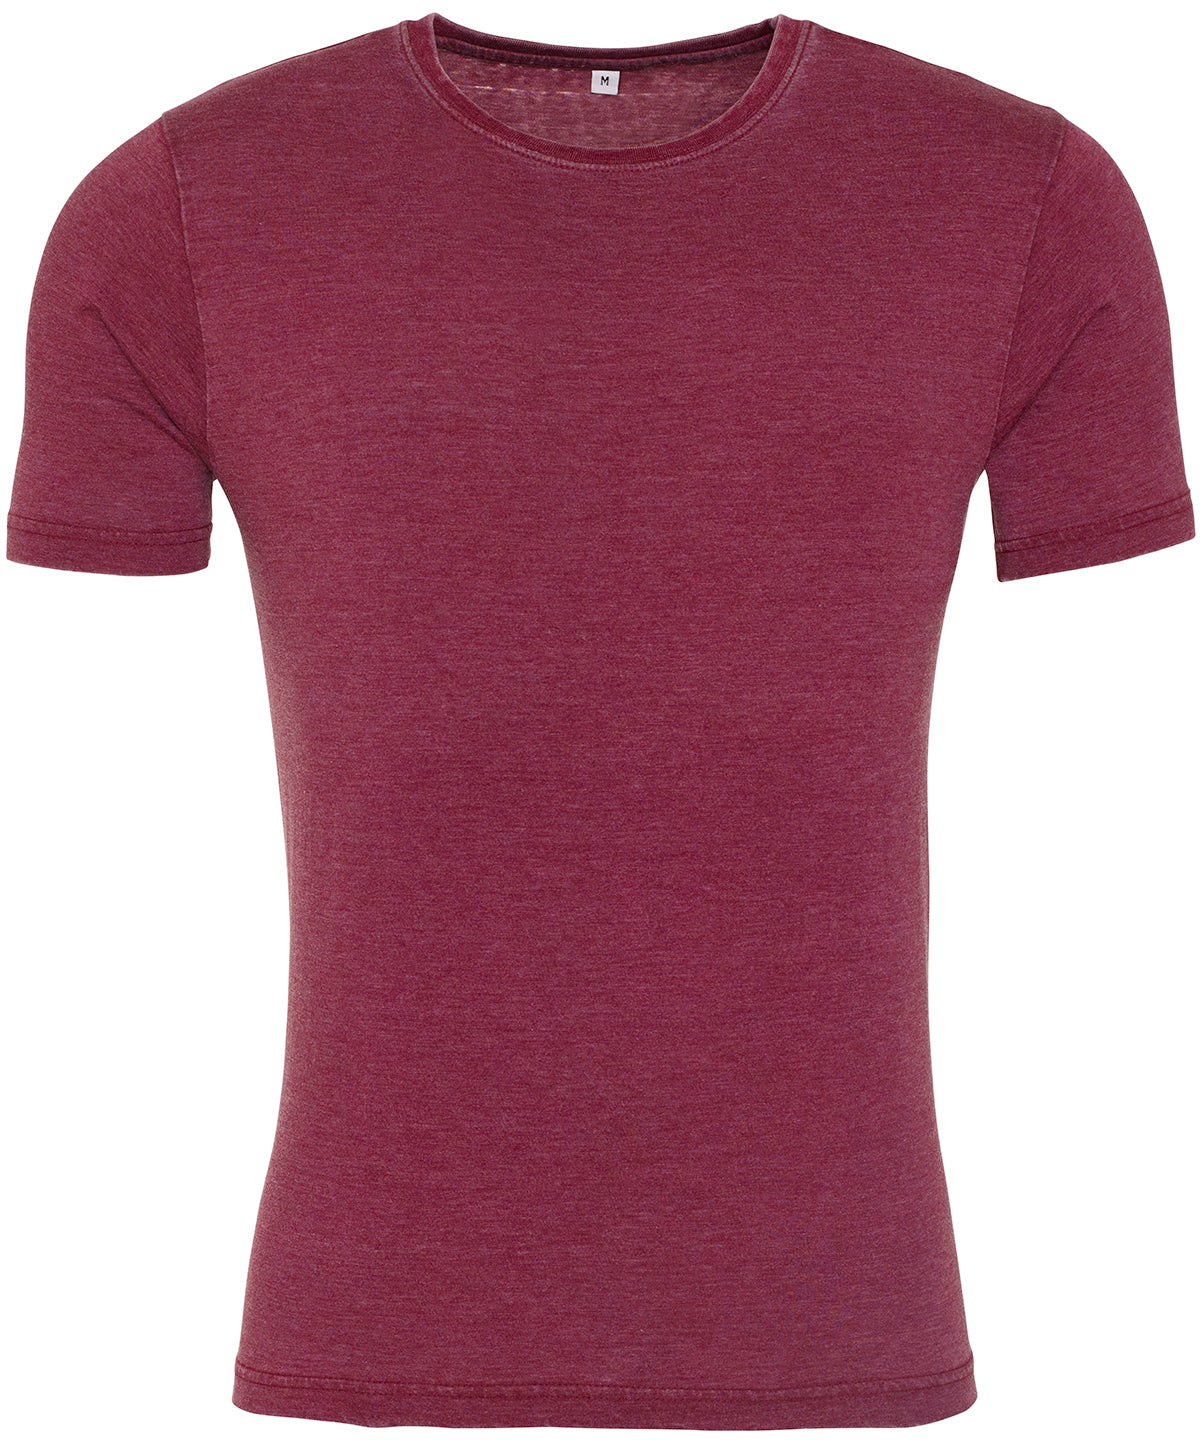 Personalised T-Shirts - Burgundy AWDis Just T's Washed T